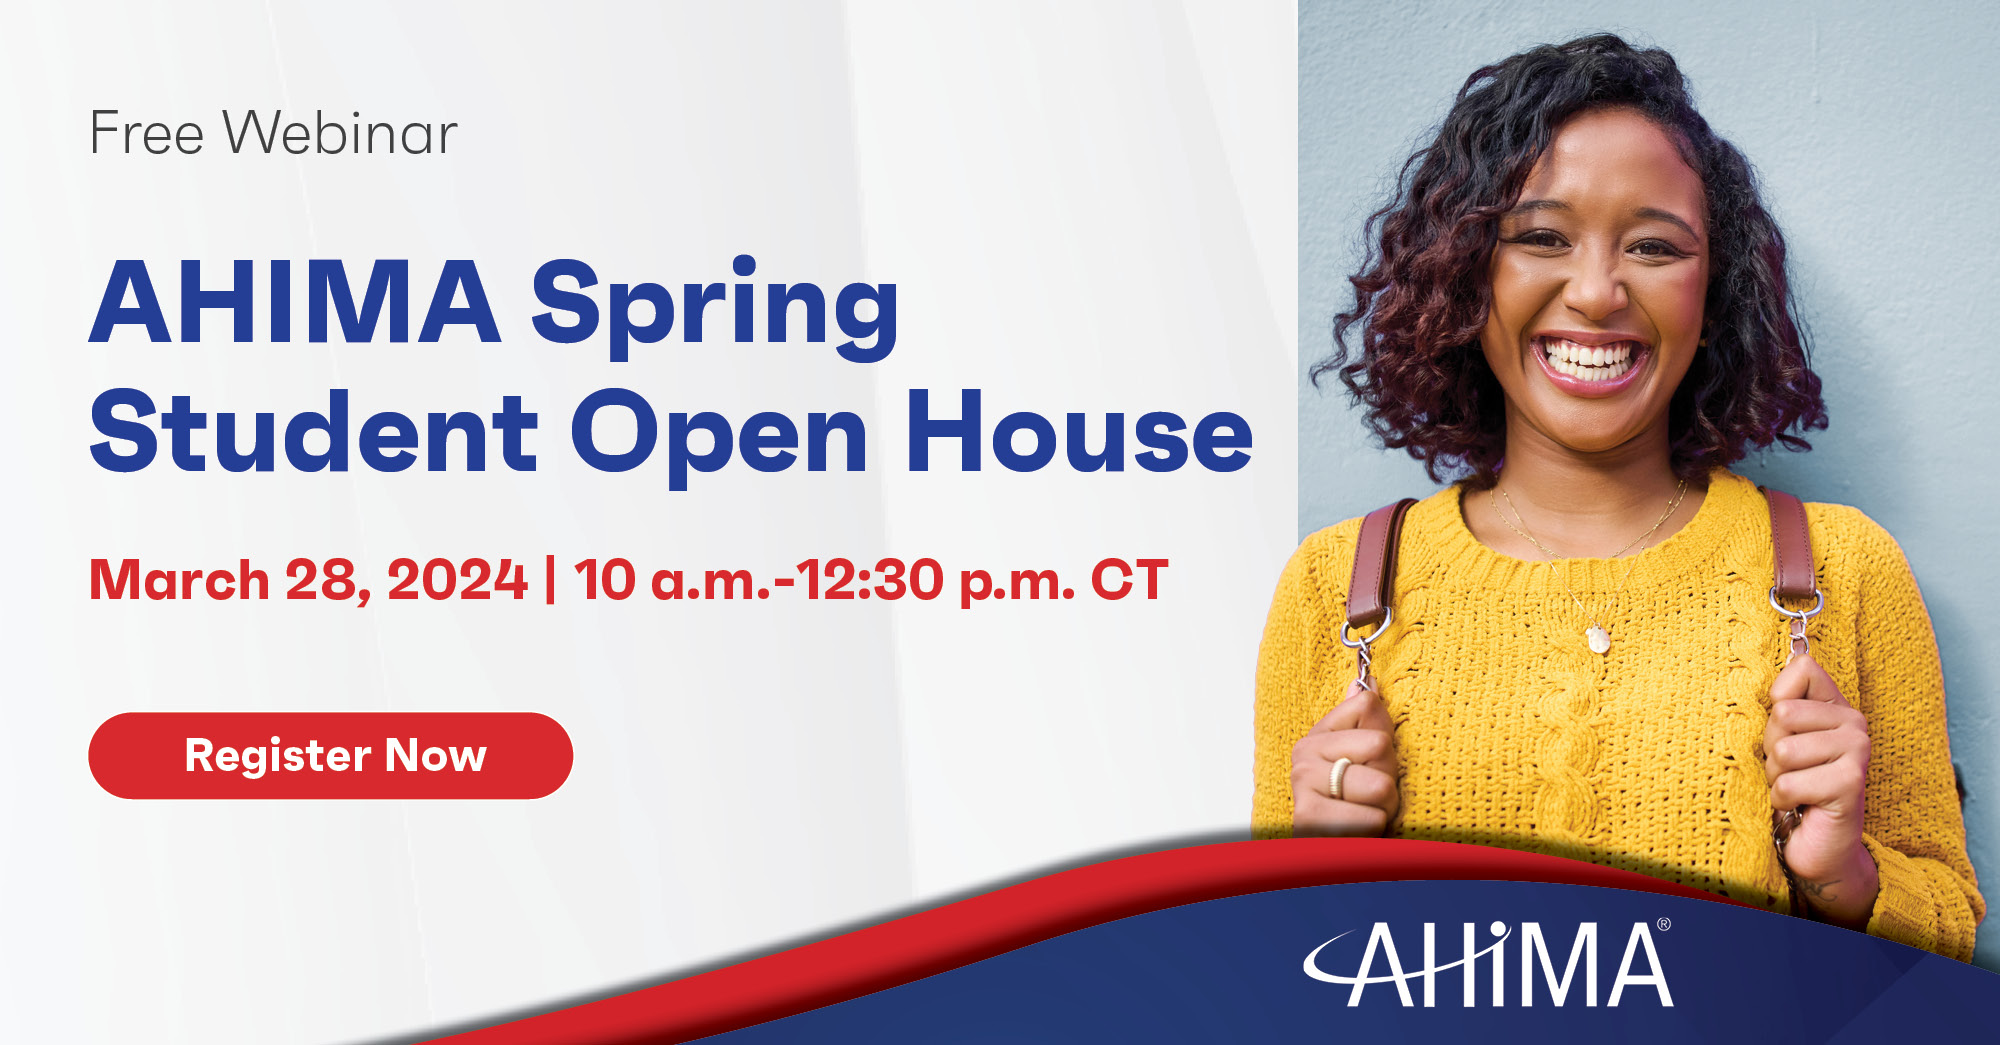 AHIMA on X: "Join us at the AHIMA Spring Student Open House on Thursday,  March 28th! This FREE webinar offers: ✔️Career insights ✔️Significance of  AHIMA certifications ✔️Navigating the transition from student to